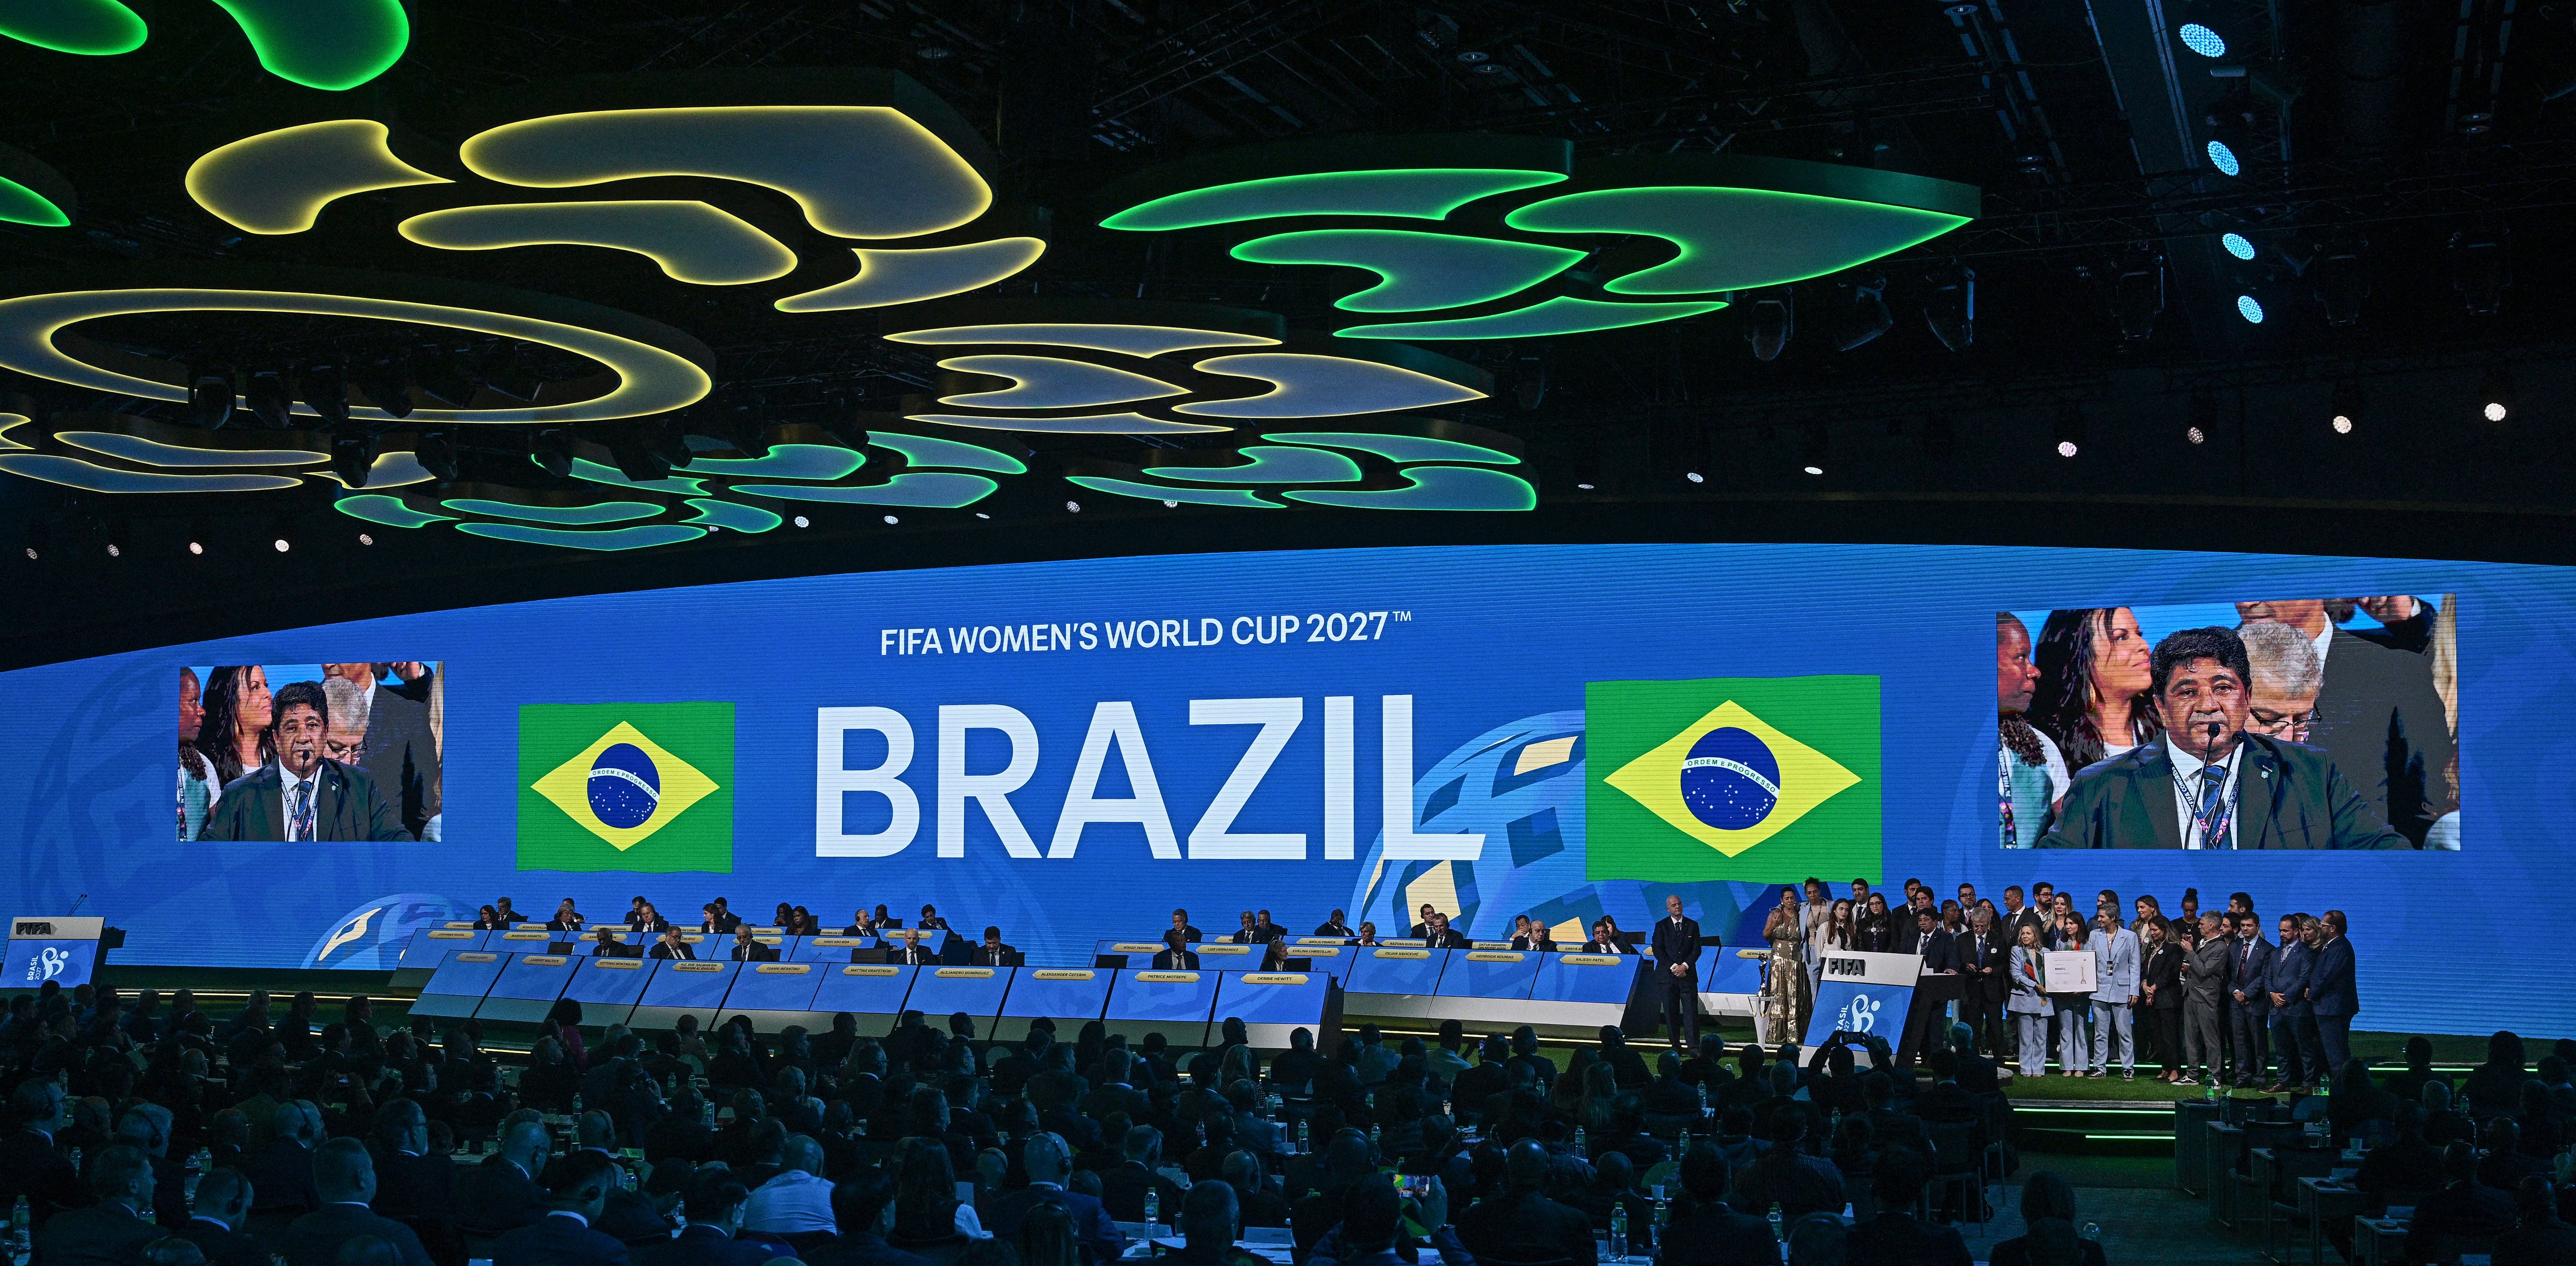 Brazil picked by FIFA to get soccer's 2027 Women's World Cup, a first
for South America